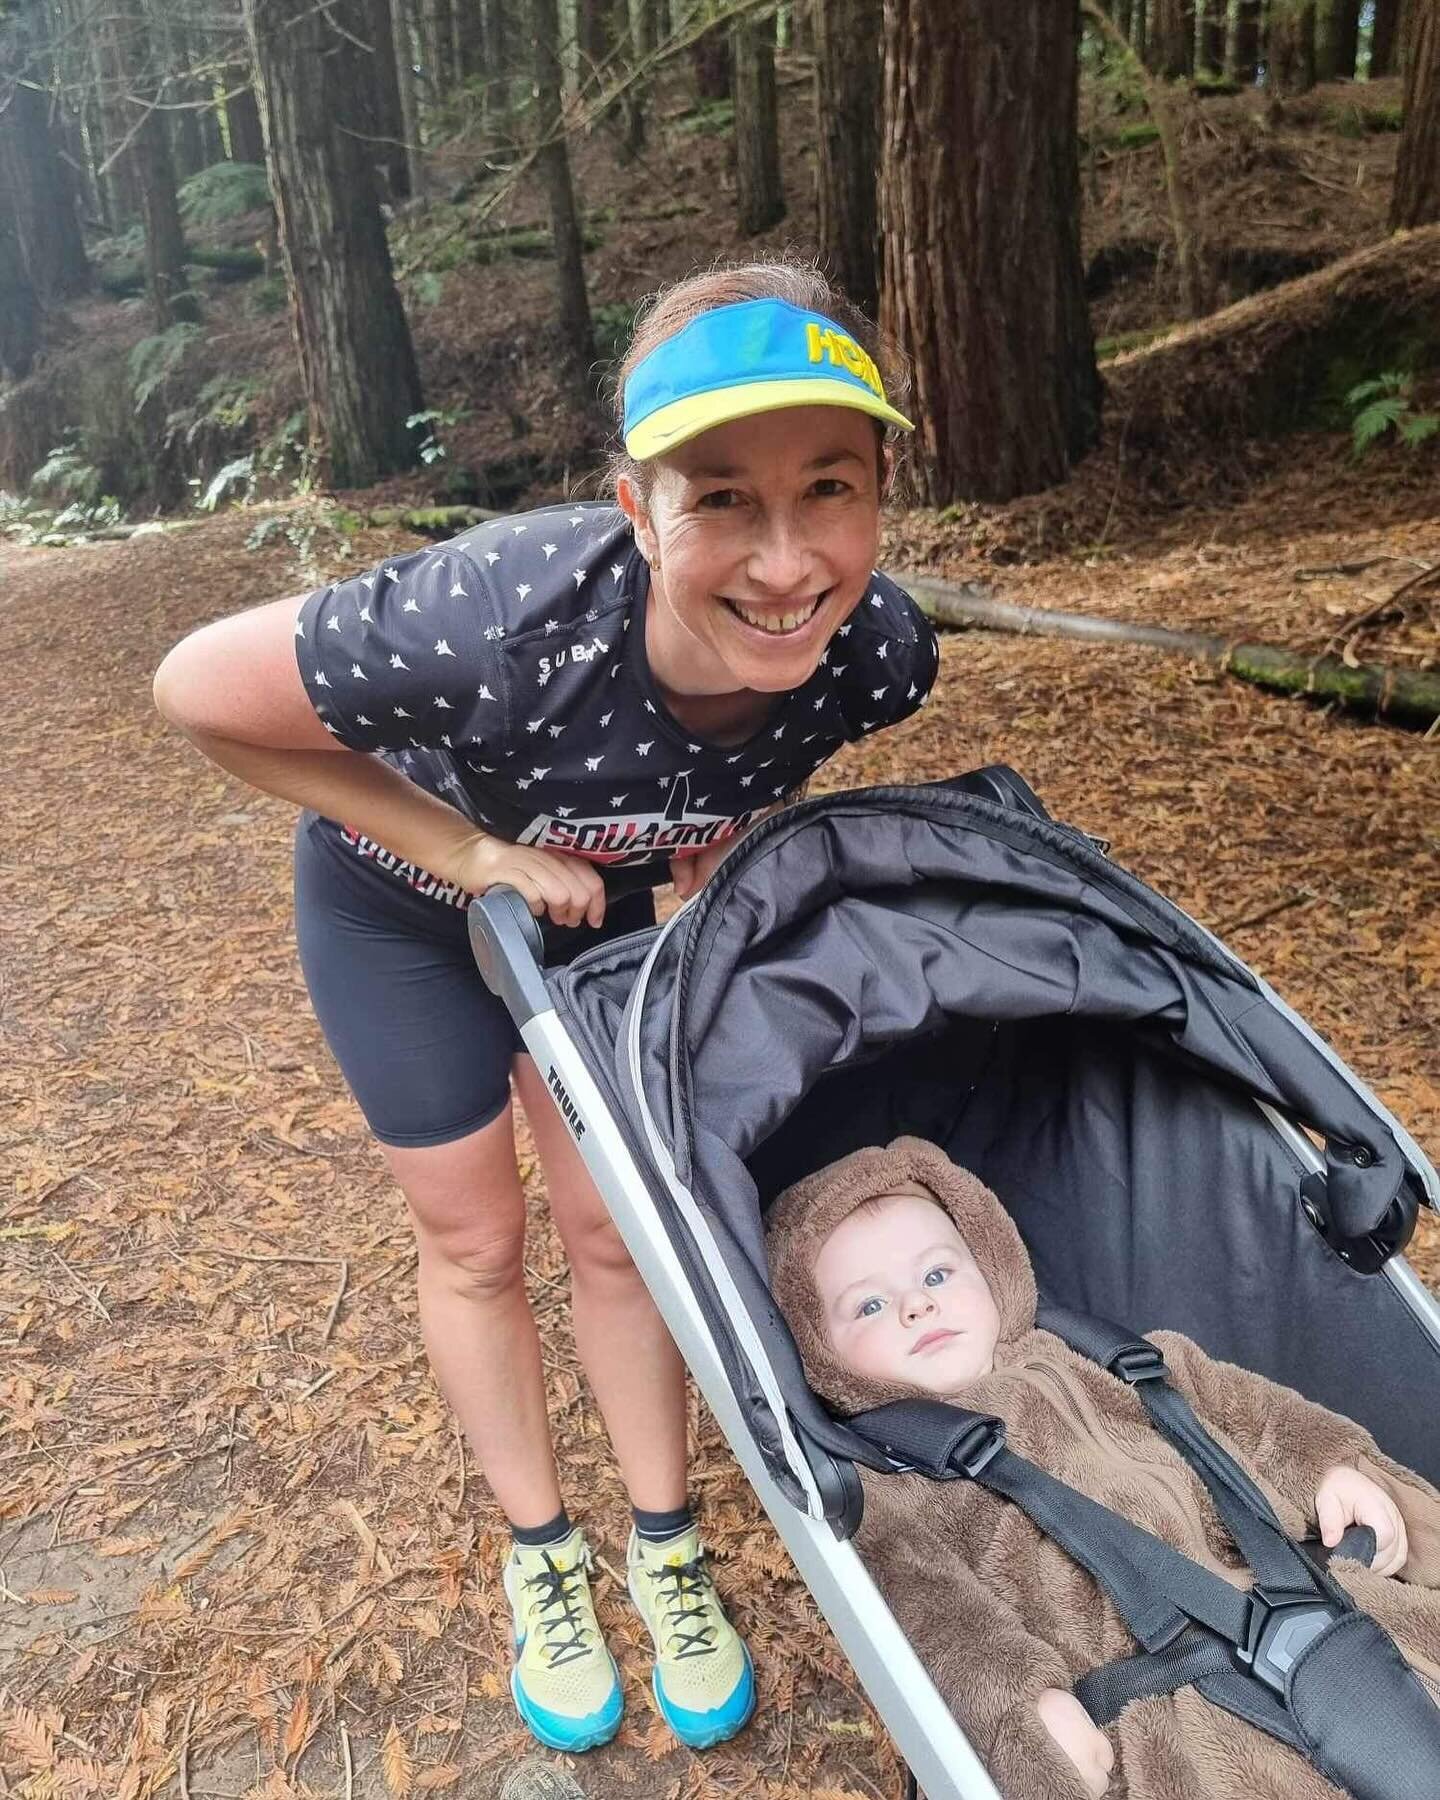 Ali Pottinger- The future of Trail Running for Women in Australasia- Dirt Church Radio 268. 

Kia ora e te whānau! Our friend, Fellow MC, and DCR away game  co-host Ali Pottinger sent us a message waiting to talk about the what the trail running comm